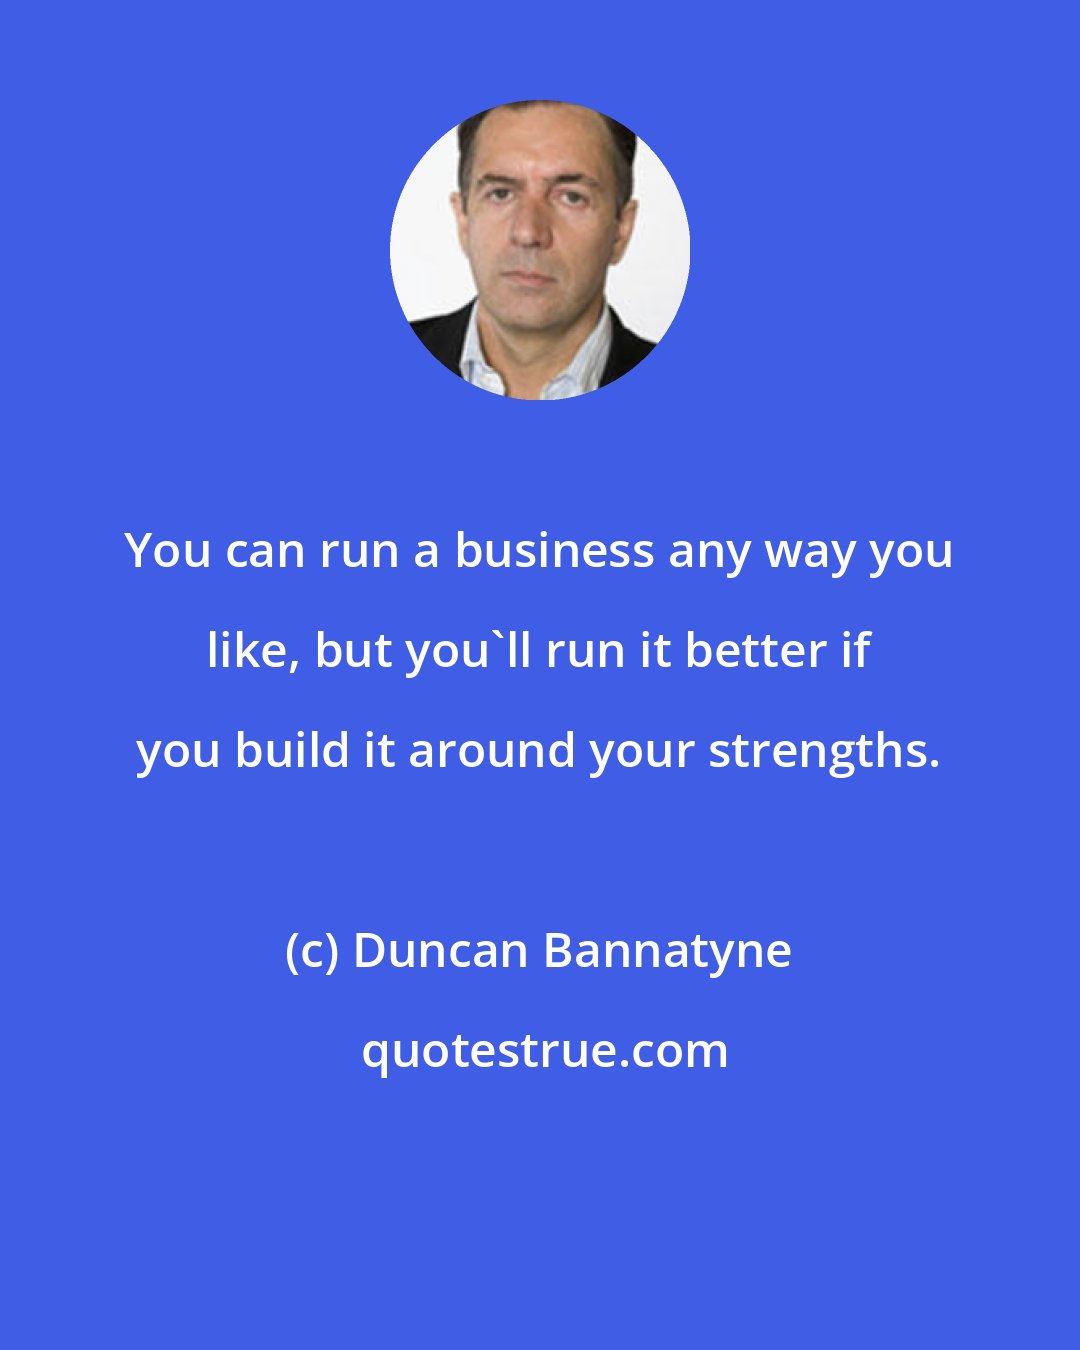 Duncan Bannatyne: You can run a business any way you like, but you'll run it better if you build it around your strengths.